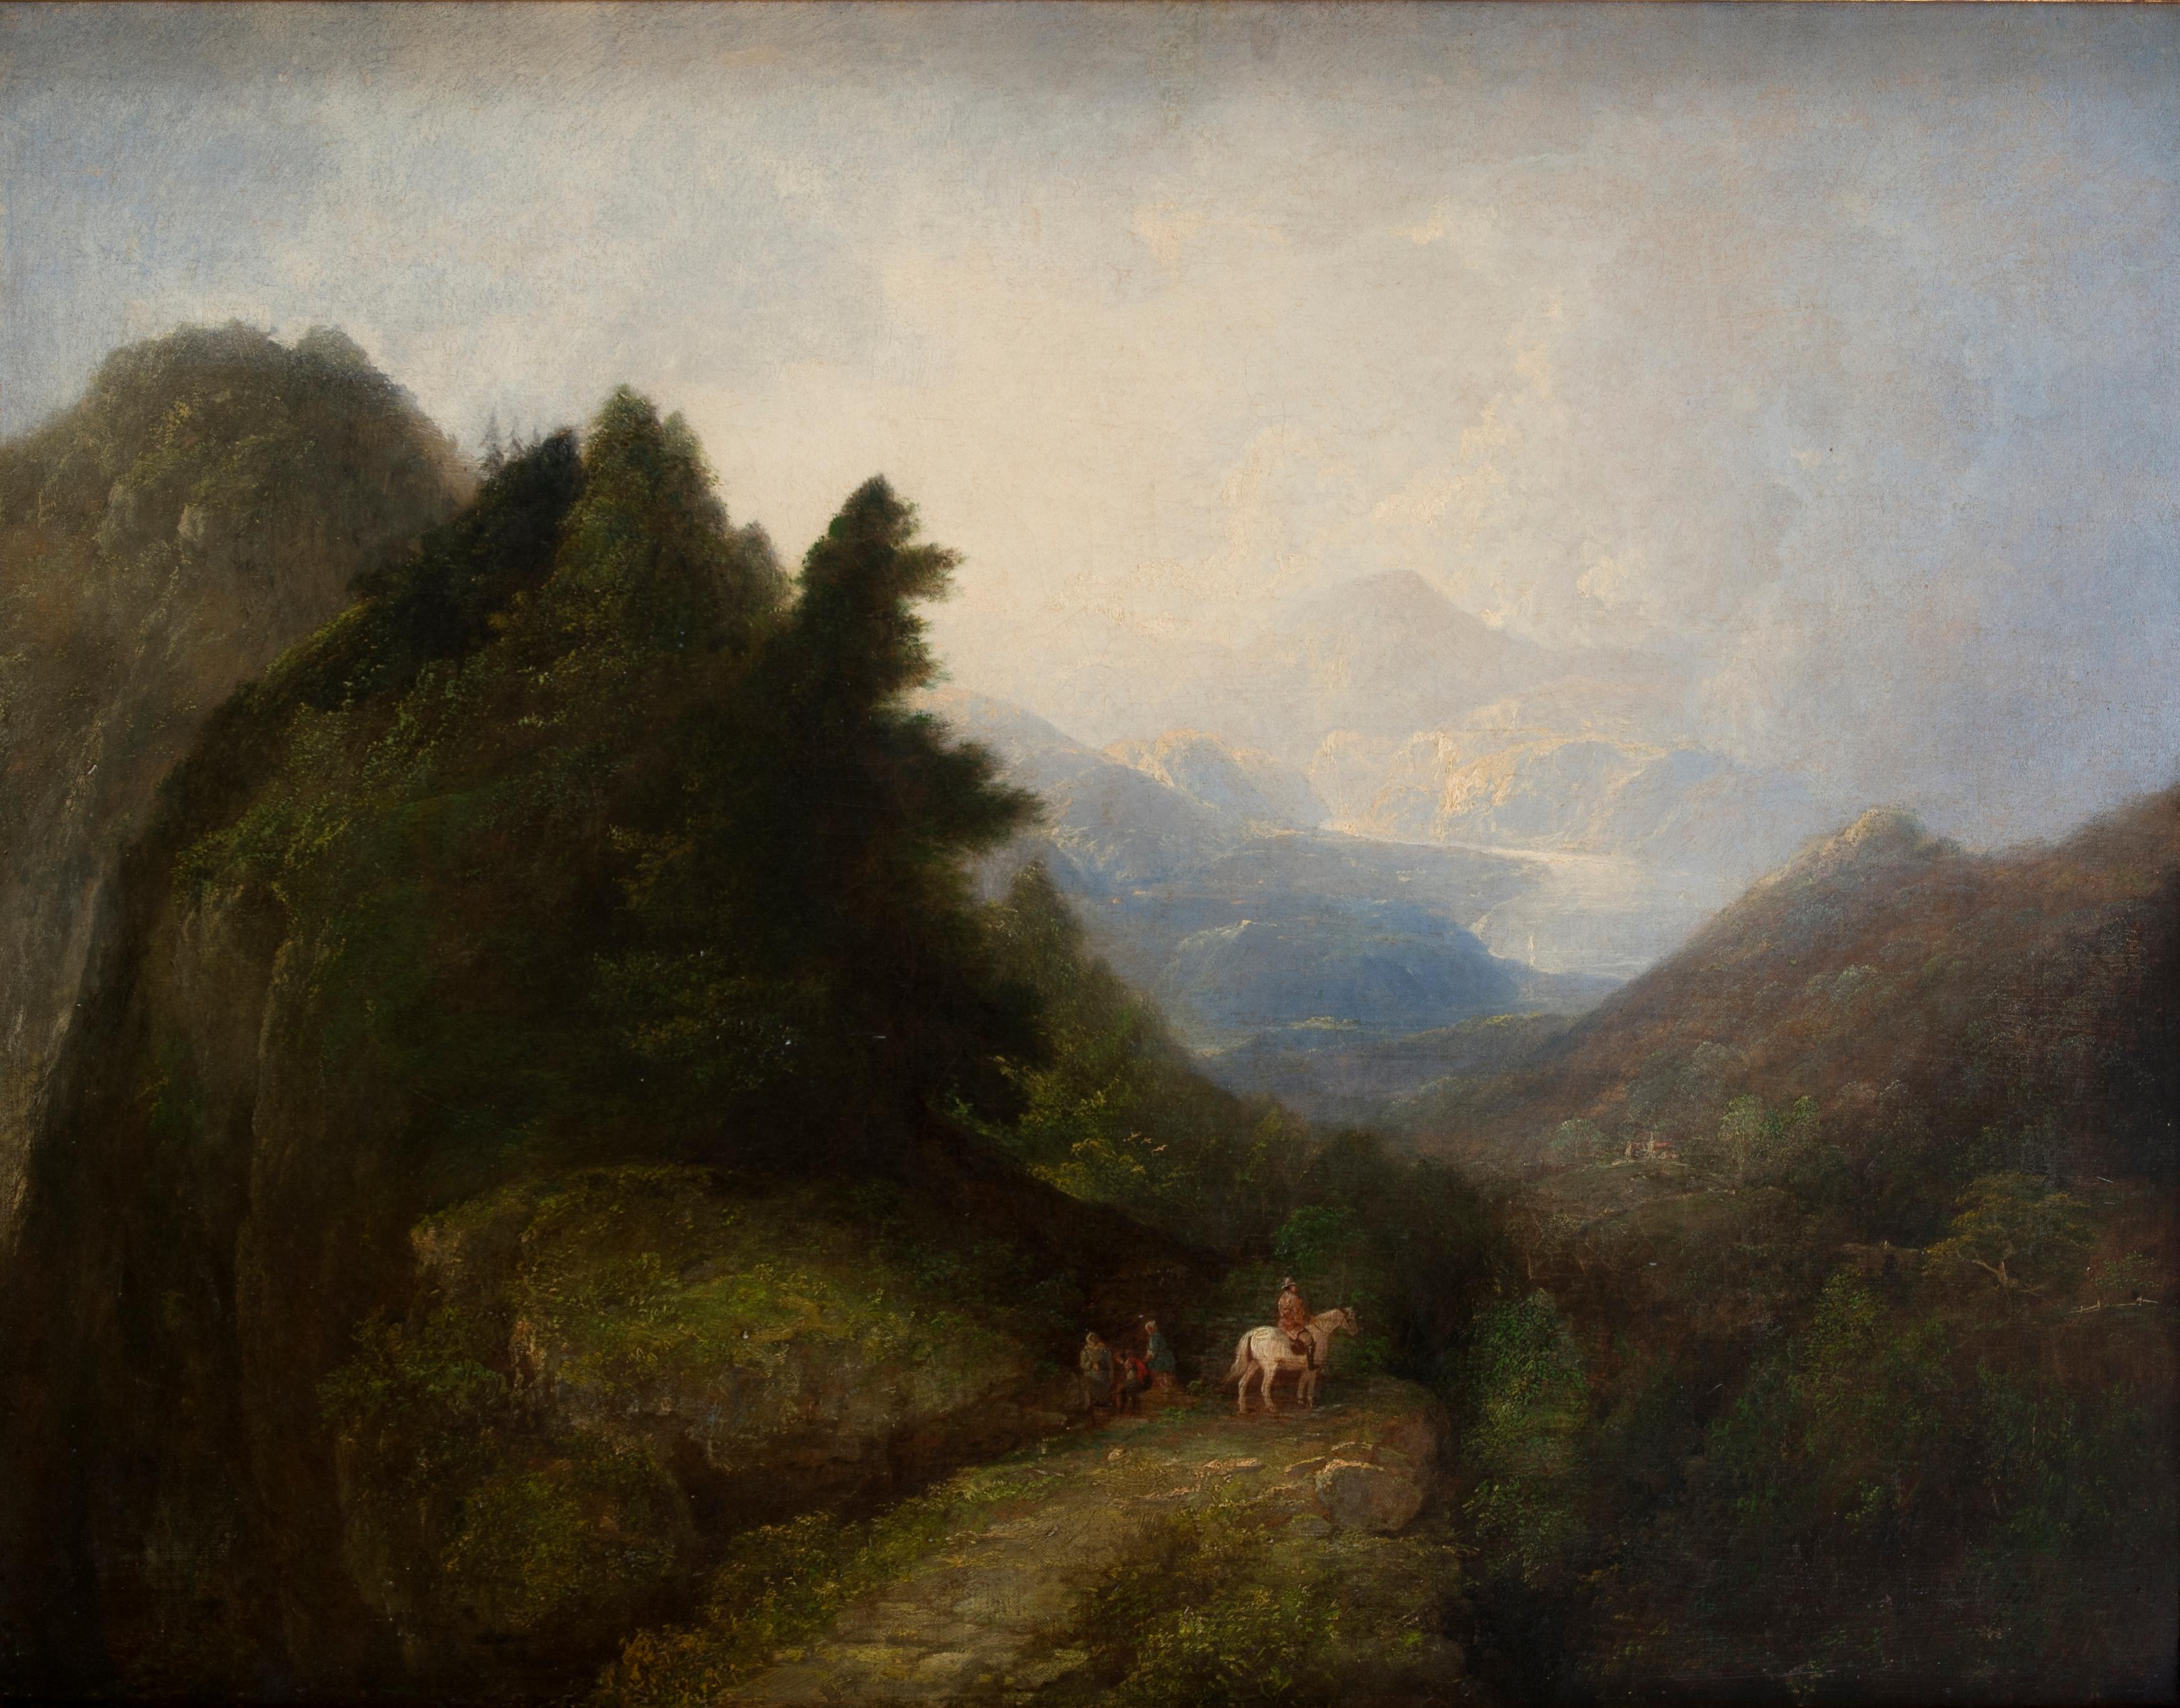 Between the bottom fog there is a river. In the foreground, between mountains and forests, four small human figures bring some life to the landscape. This pictorial genre, despite the great development that it had already since the 16th century, can